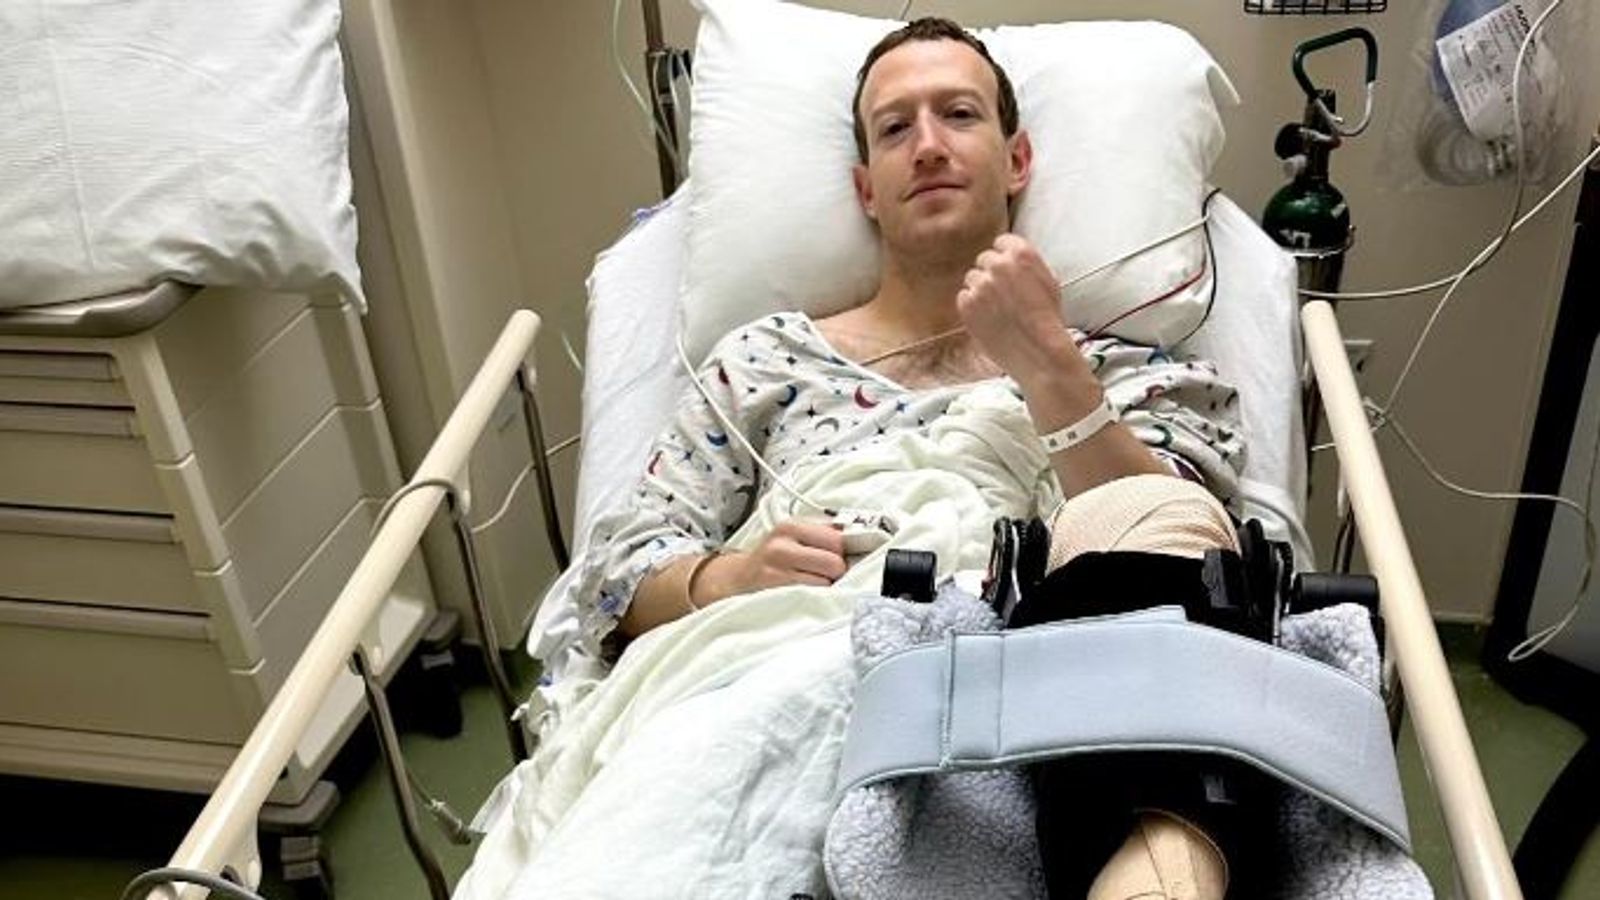 Mark Zuckerberg has surgery after injuring knee during training for mixed martial arts fight